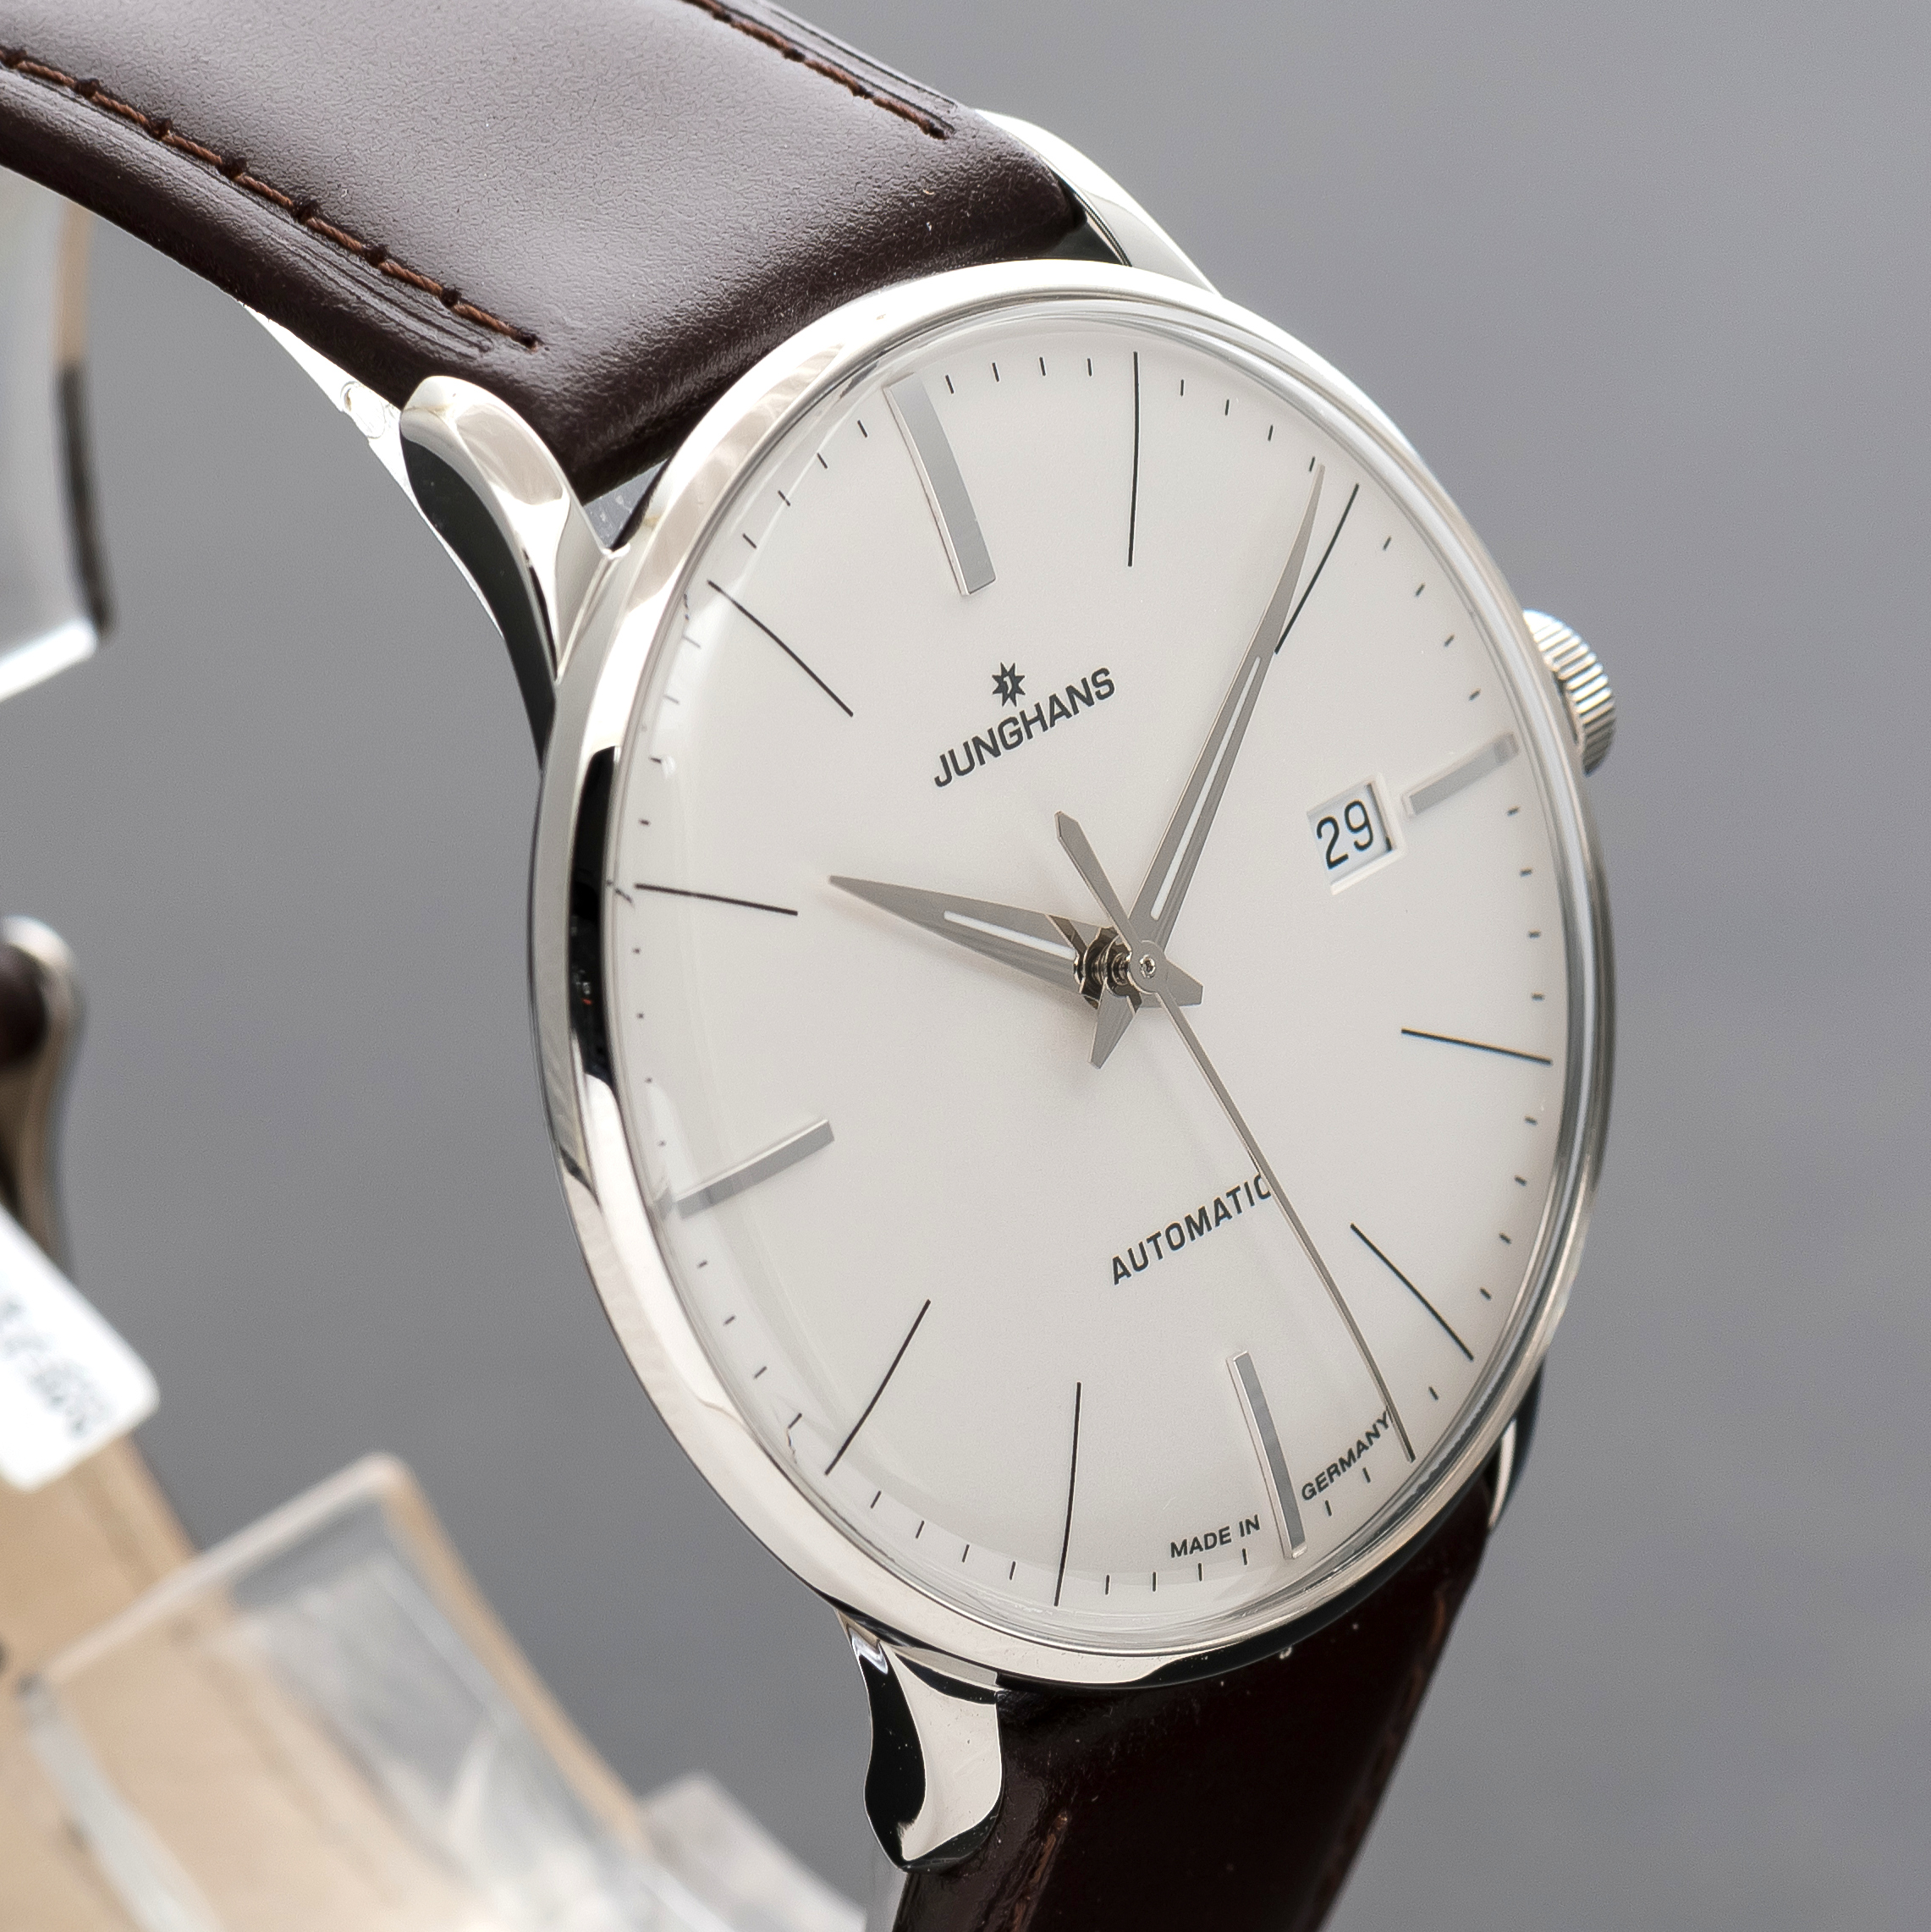 Junghans Meister Classic Automatic 027/4310.01